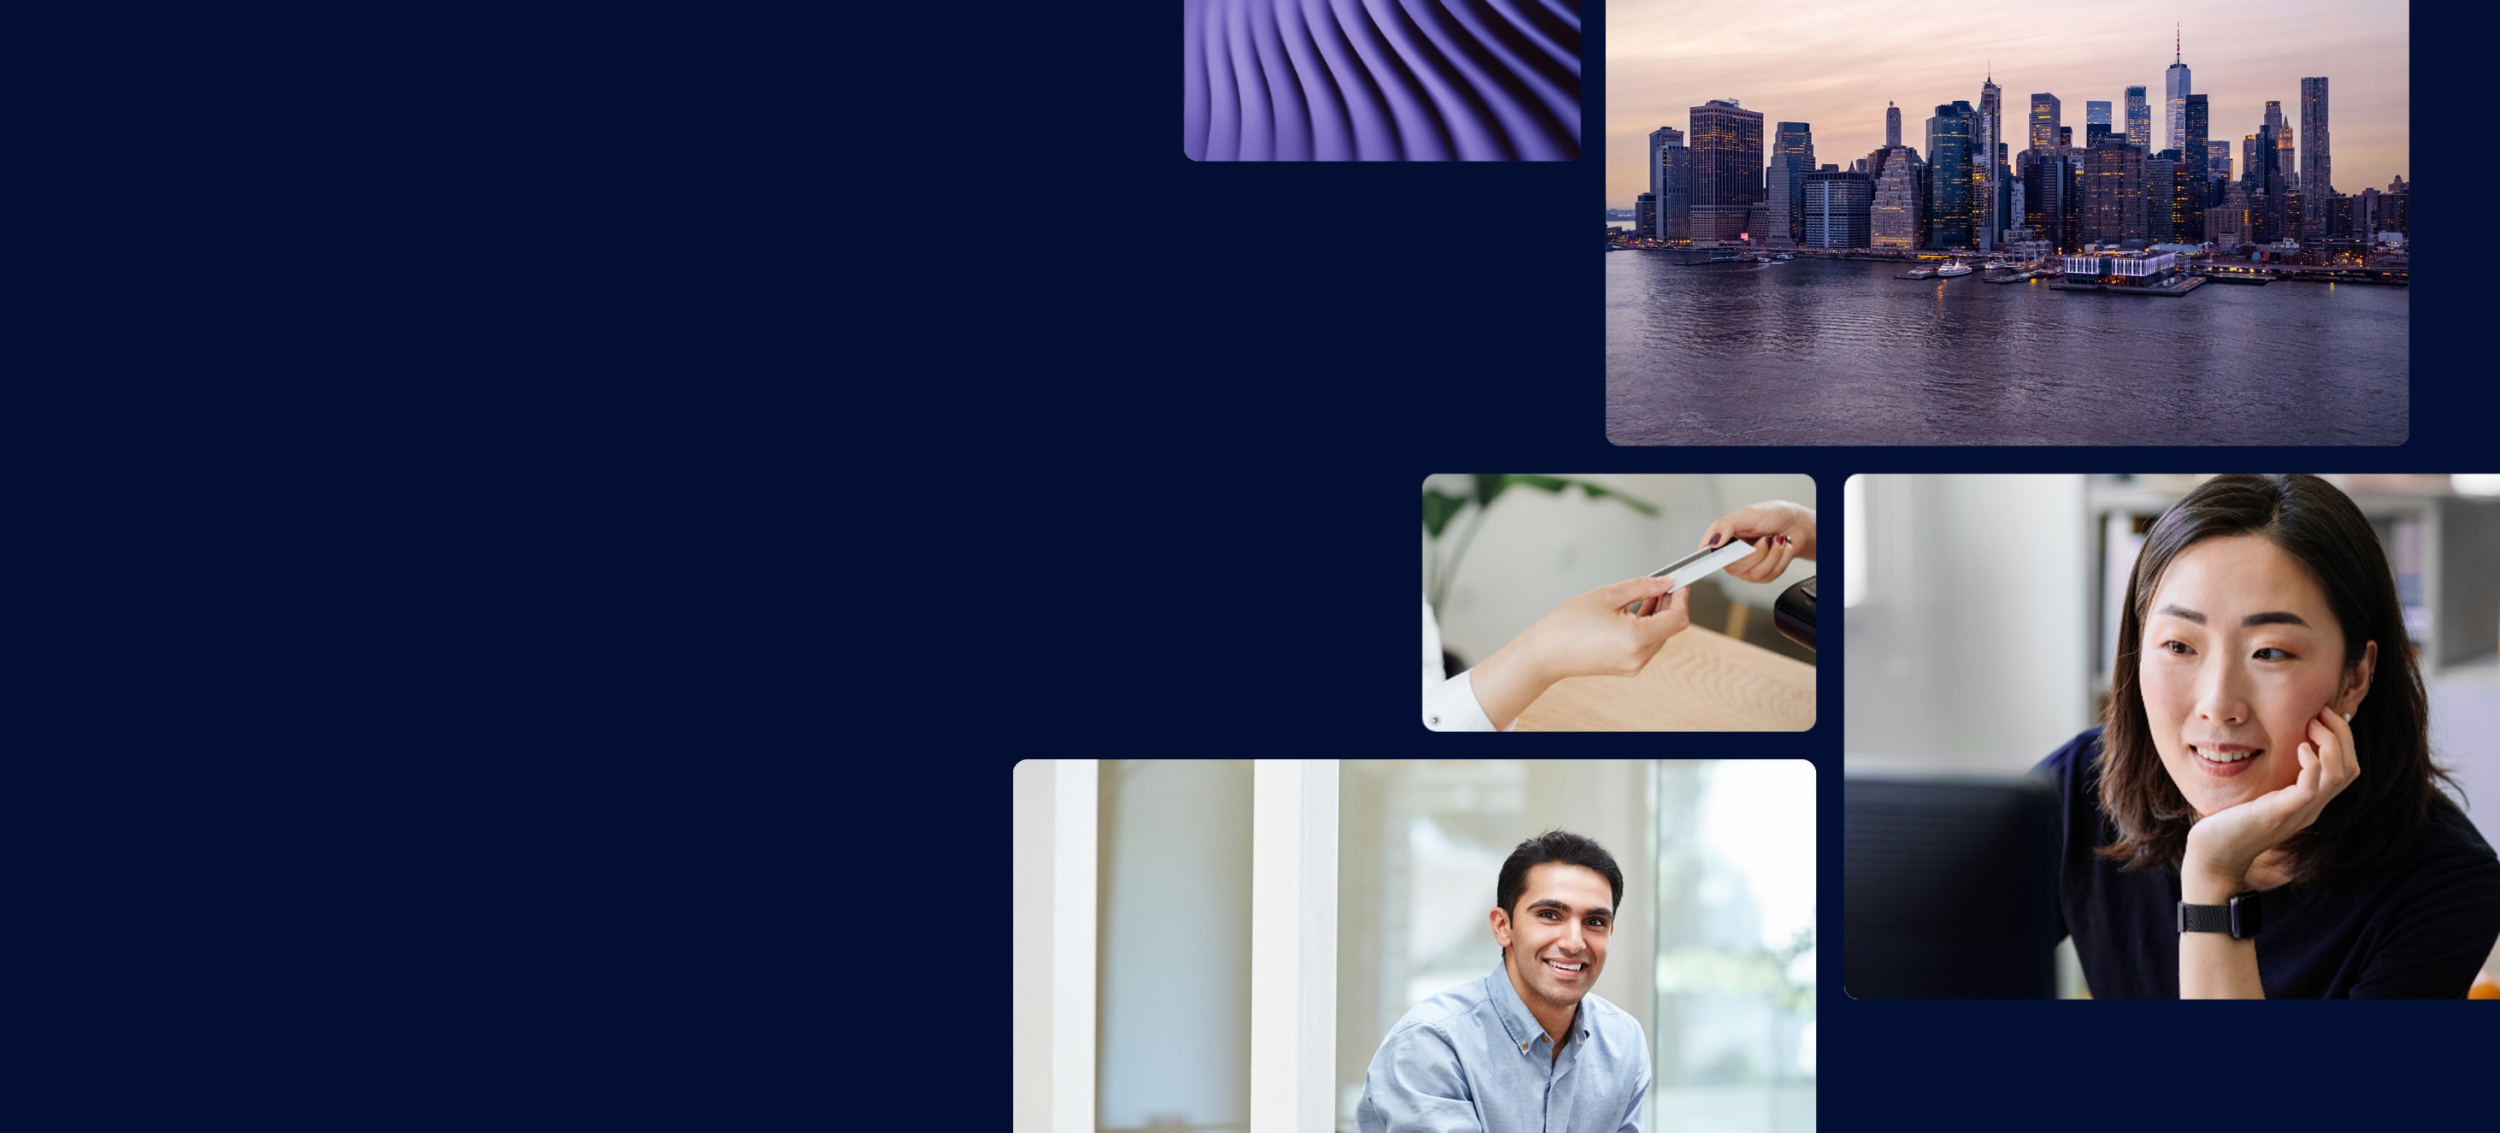 An atmospheric collage of multiple images that represent global payments, including a cityscape, an abstract wave of purple movement, two hands exchanging a credit card, a smiling woman using a computer and a smiling office worker looking out the window.